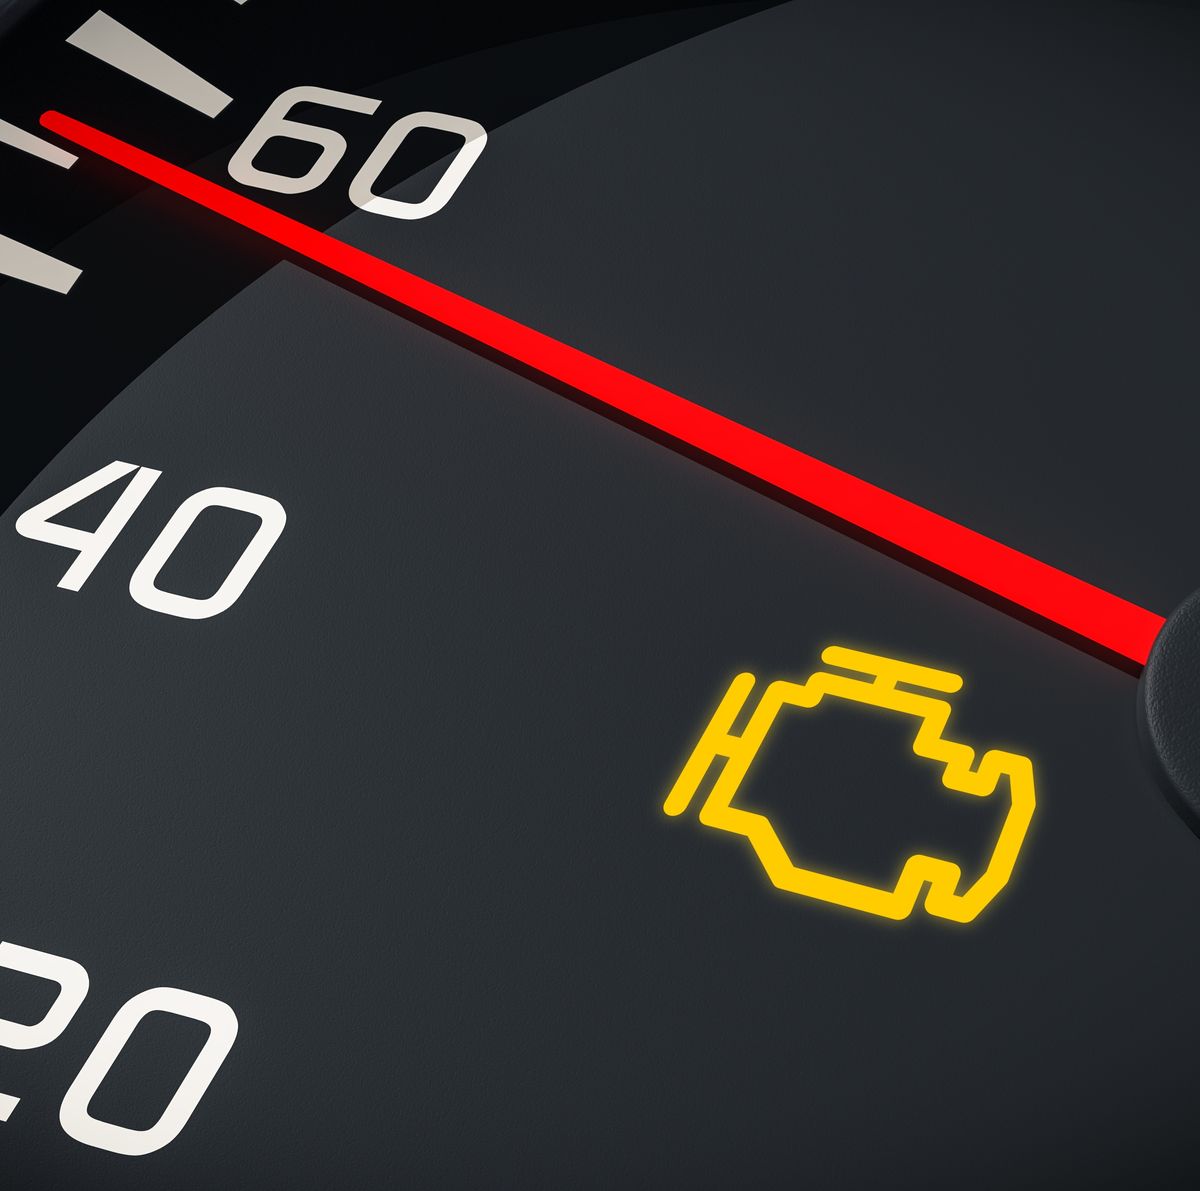 A Guide to oil warning lights and what to do if it comes on